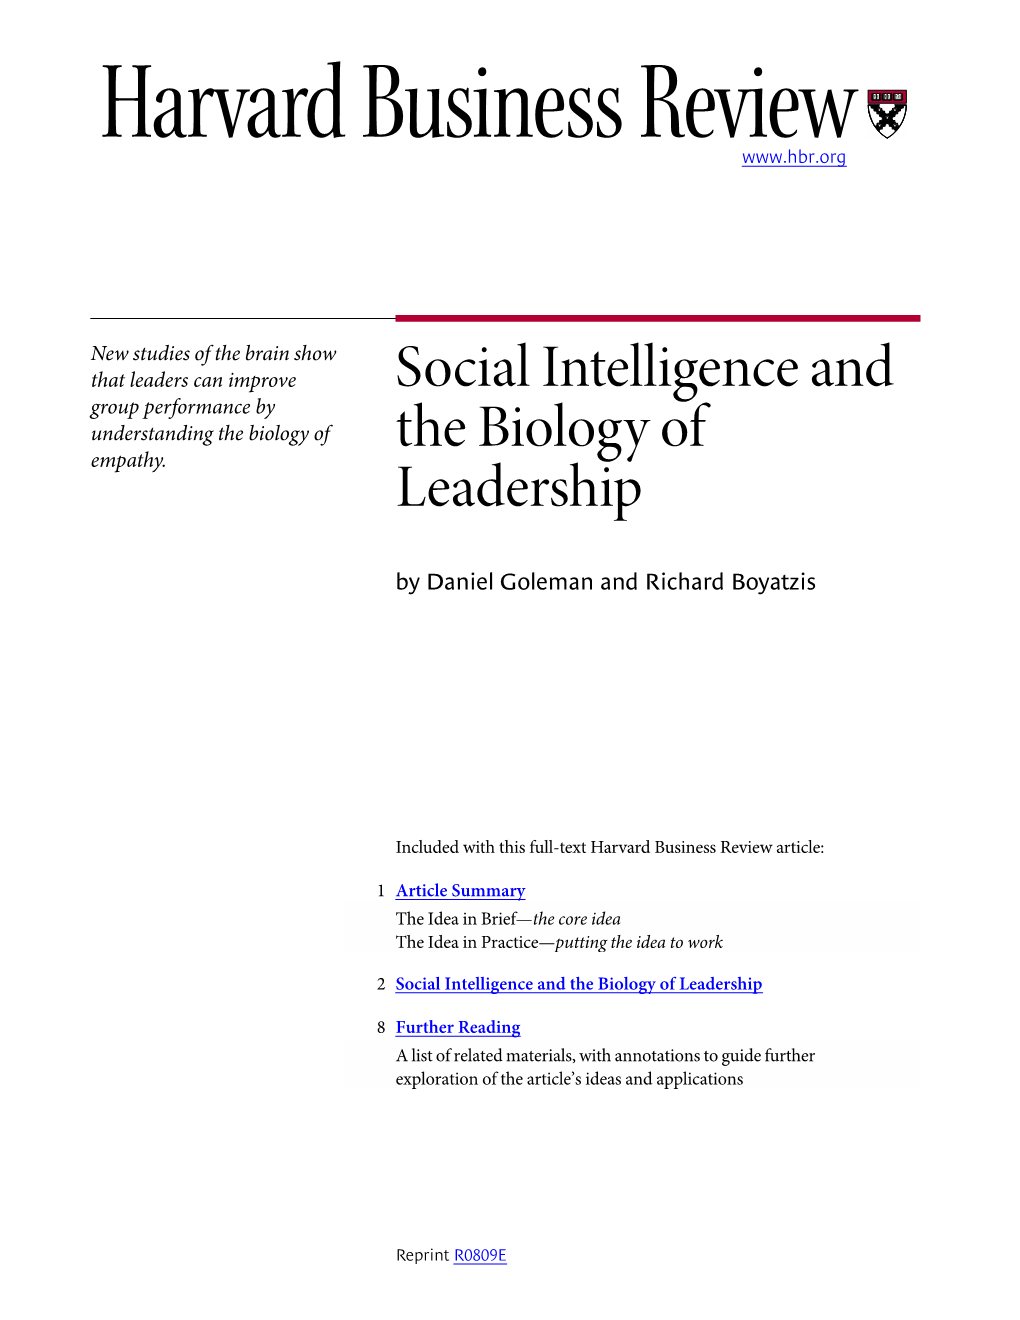 Social Intelligence and the Biology of Leadership